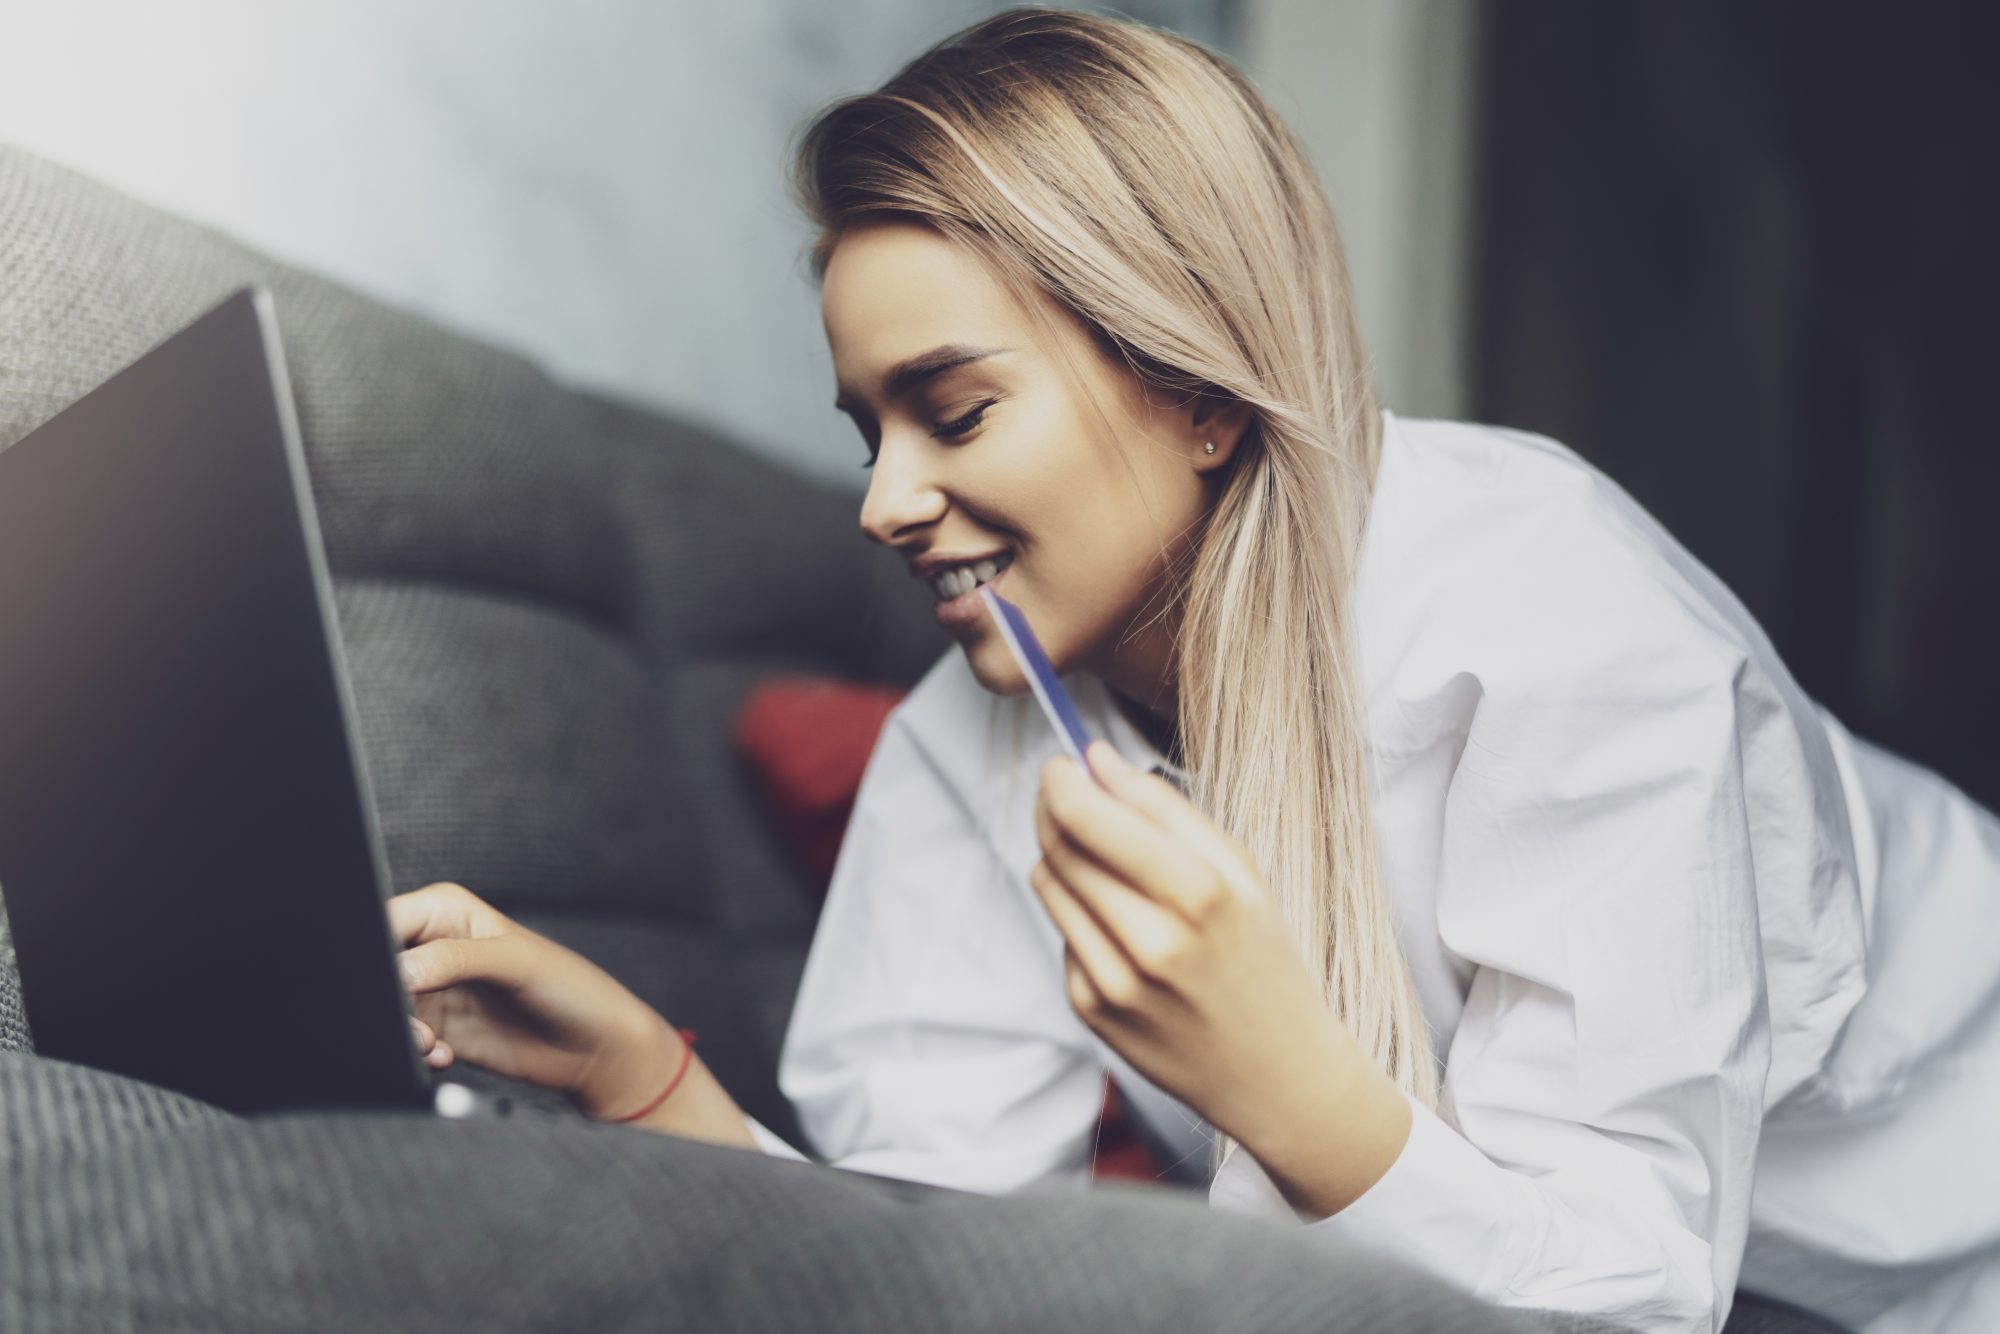 Young blonde woman leaning over laptop on sofa